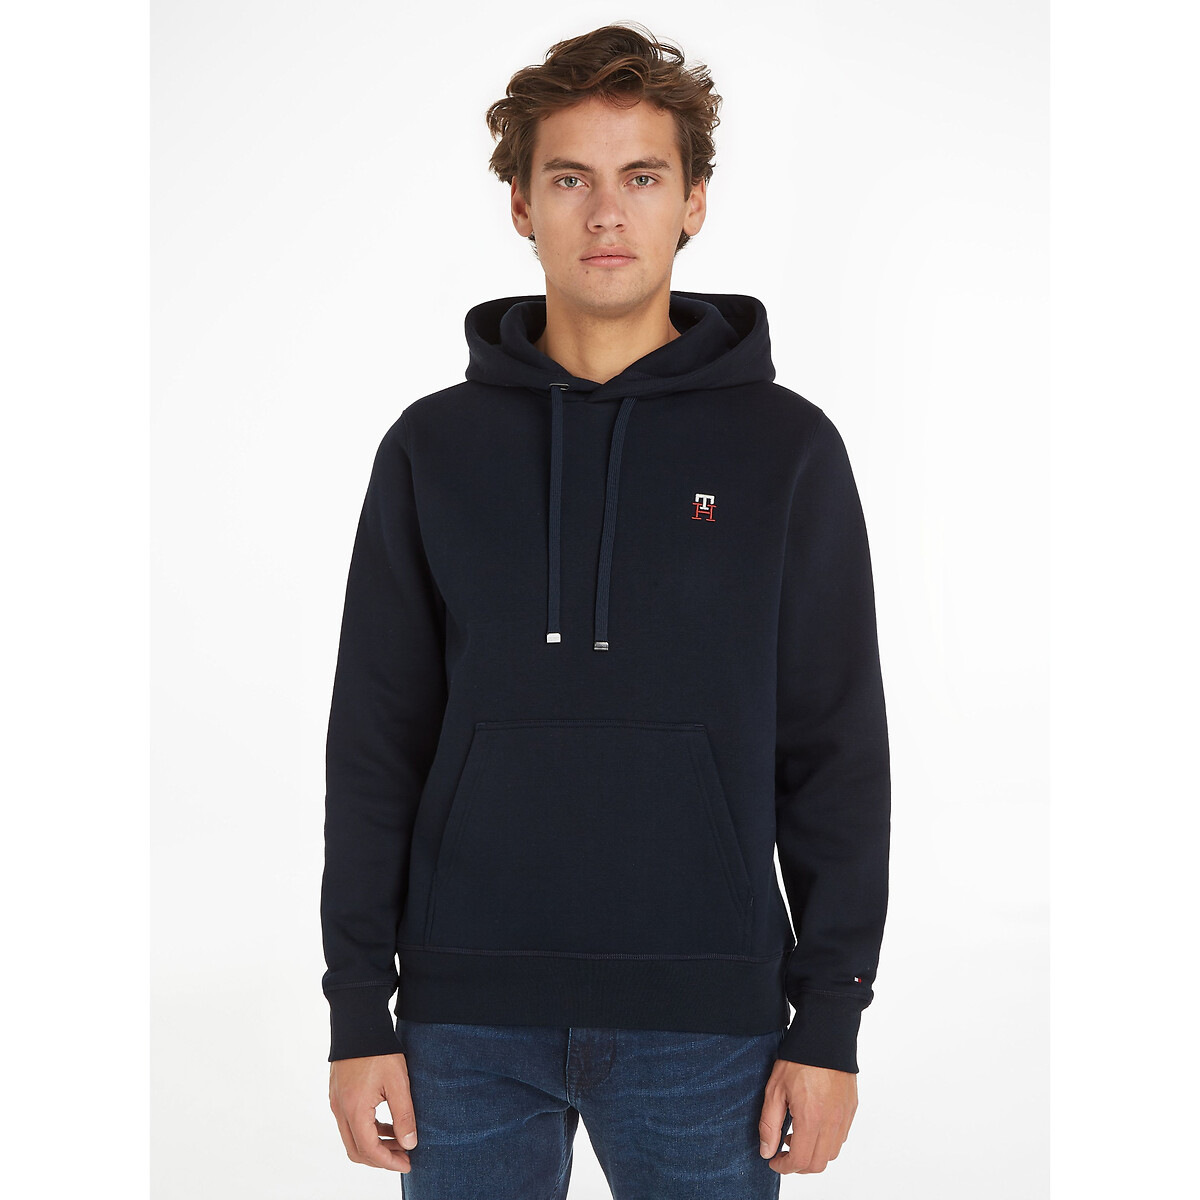 Image of Embroidered Monogram Logo Hoodie in Cotton Mix